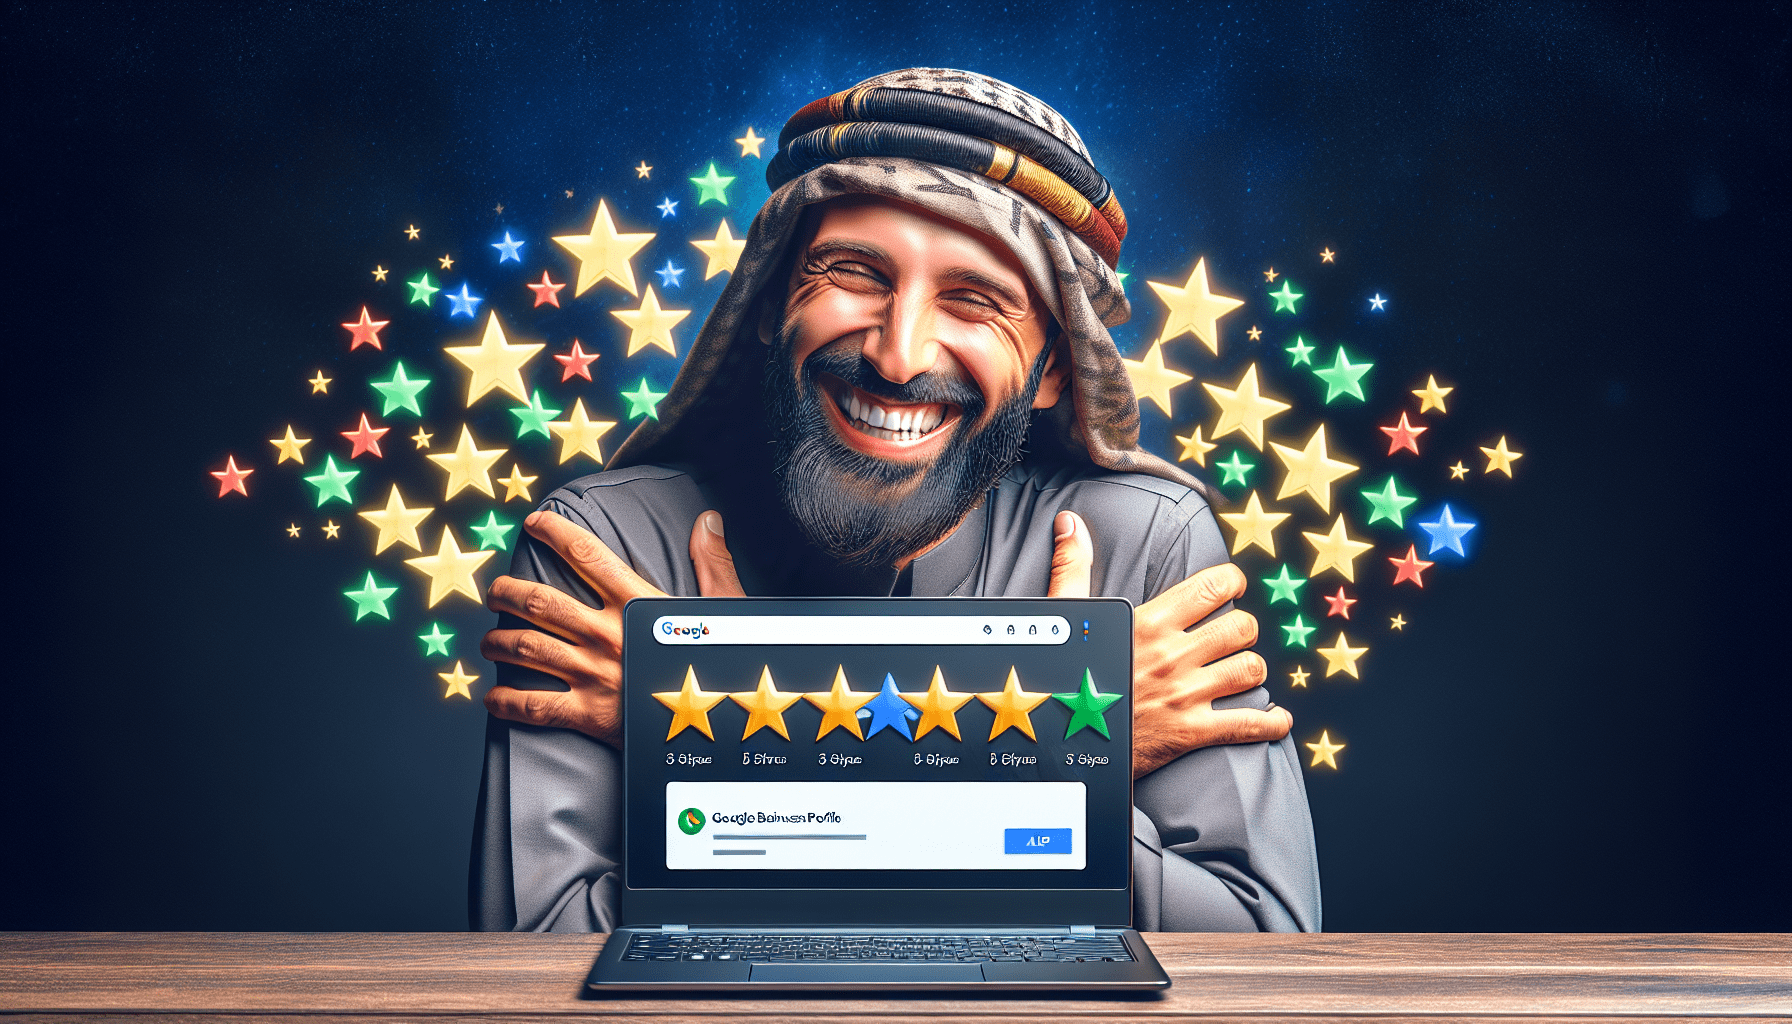 A business owner beaming with joy while surrounded by 5-star rating notifications popping up from their Google Business Profile on a laptop.